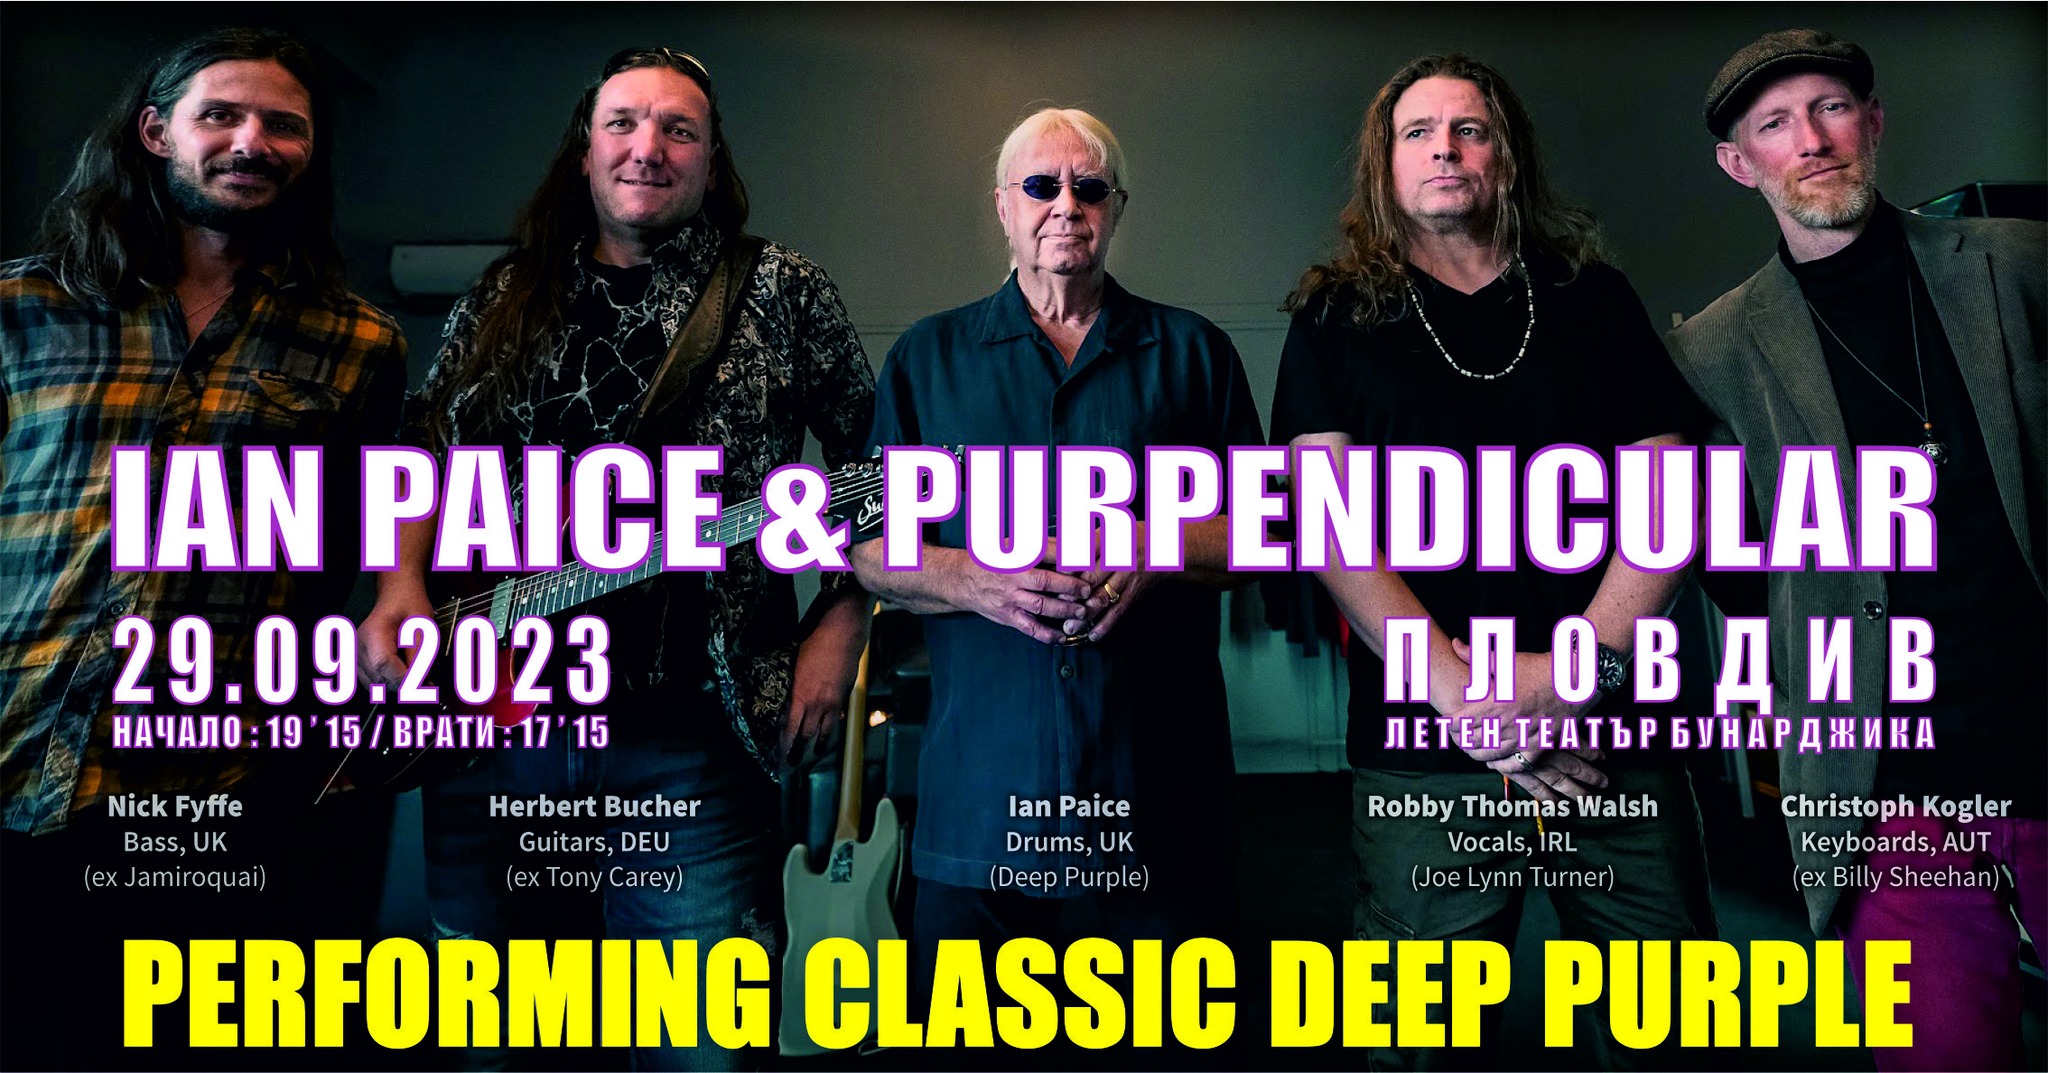 Concert with Ian Paice from Deep Purple and the Purpendicular Group |  visitplovdiv.com